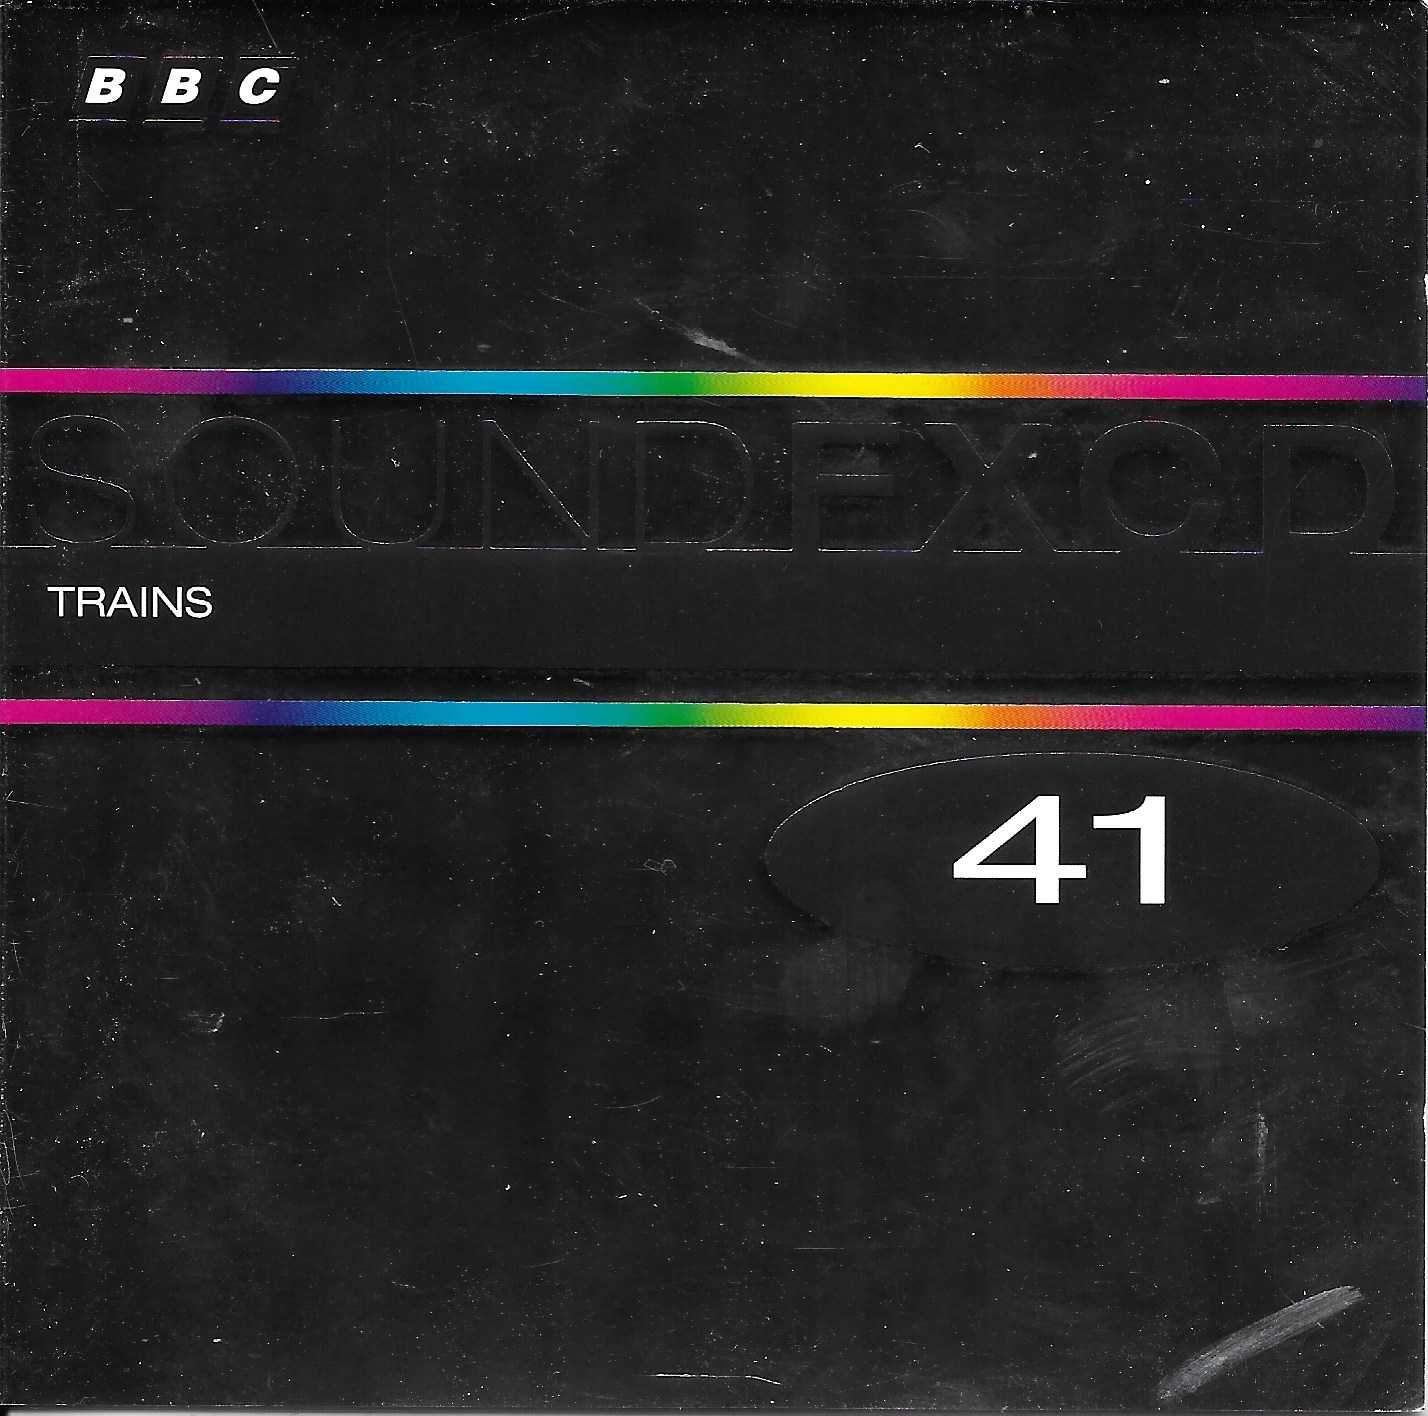 Picture of BBCCD SFX041 Trains by artist Various from the BBC cds - Records and Tapes library